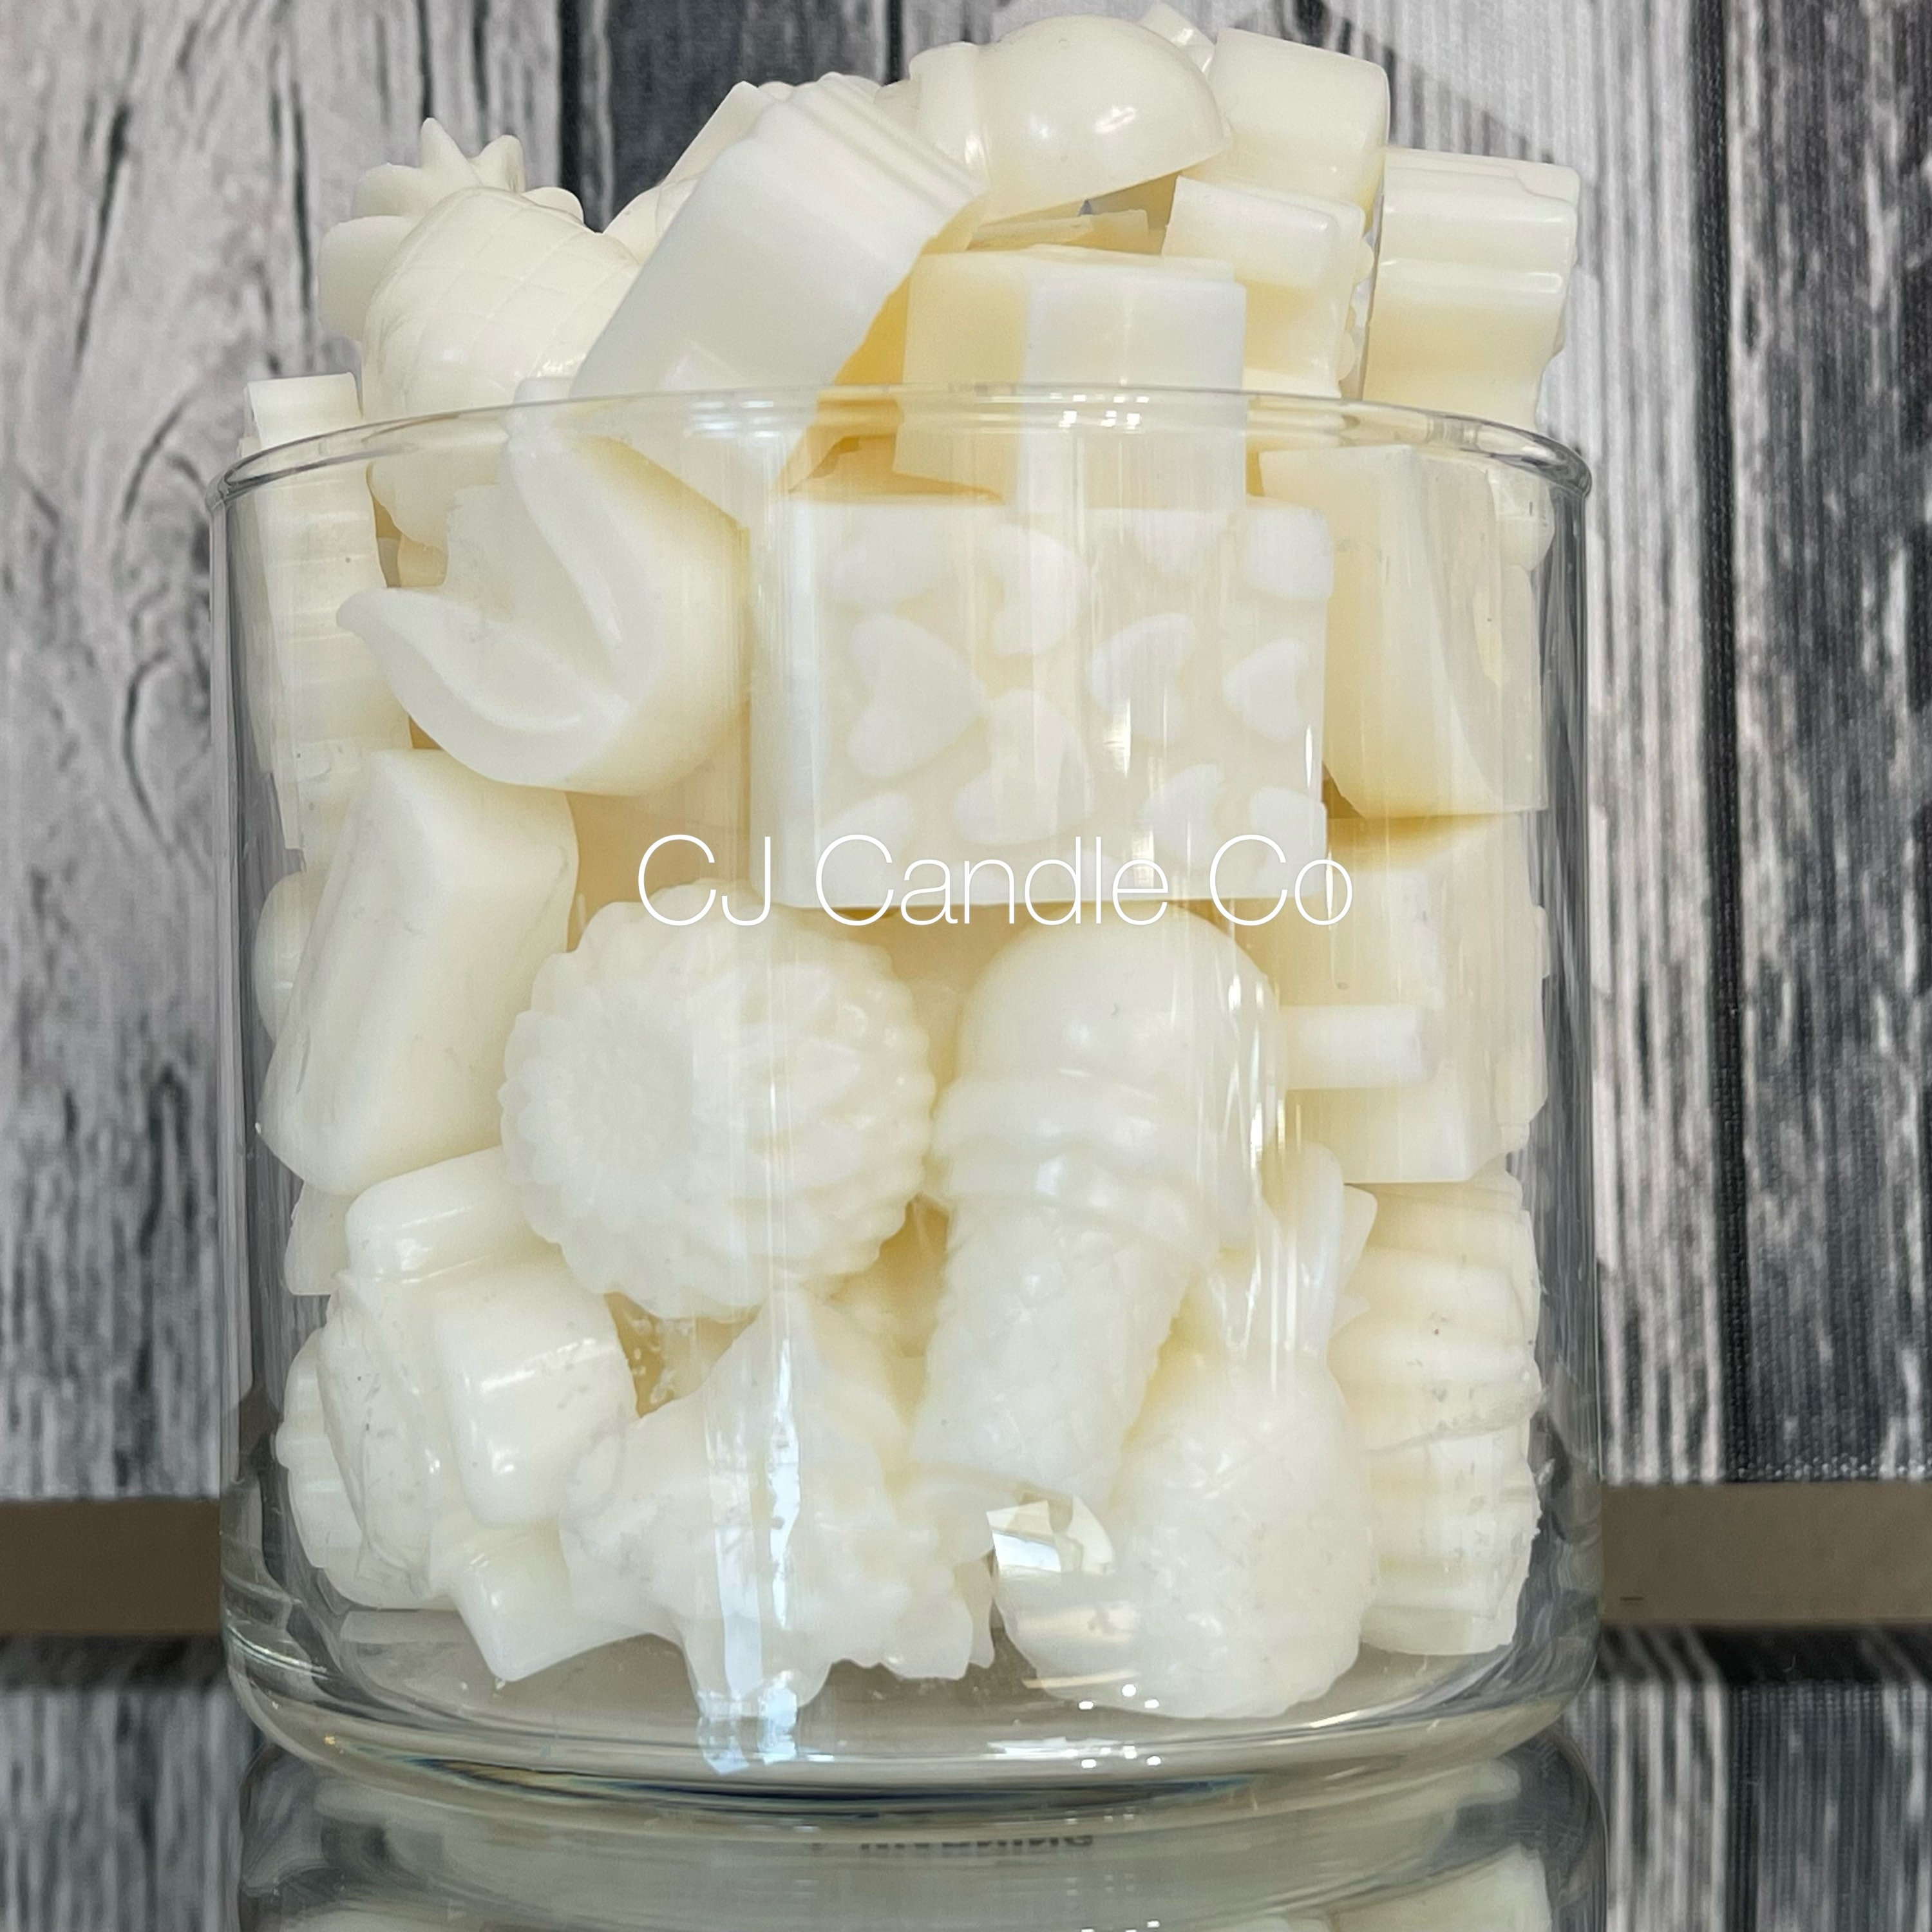 Champagne Toast 3 Bath & Body Works Candle Wax Melts Snap Bars Gift Set BBW  Wax Melts Perfect Gift for Mom, Sister, Valentines Day 